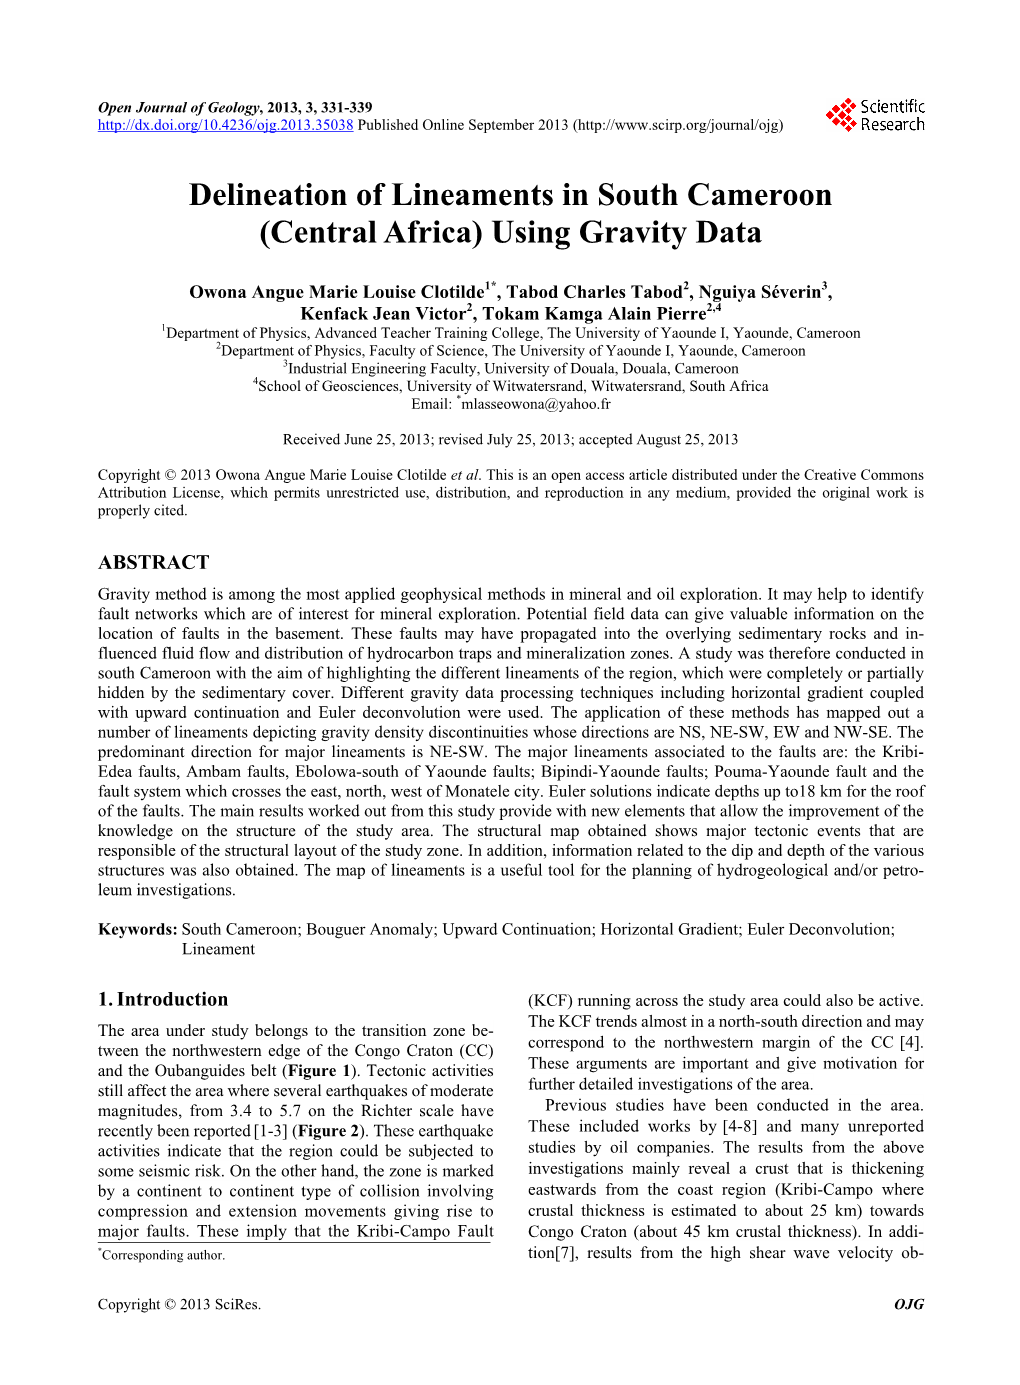 Delineation of Lineaments in South Cameroon (Central Africa) Using Gravity Data